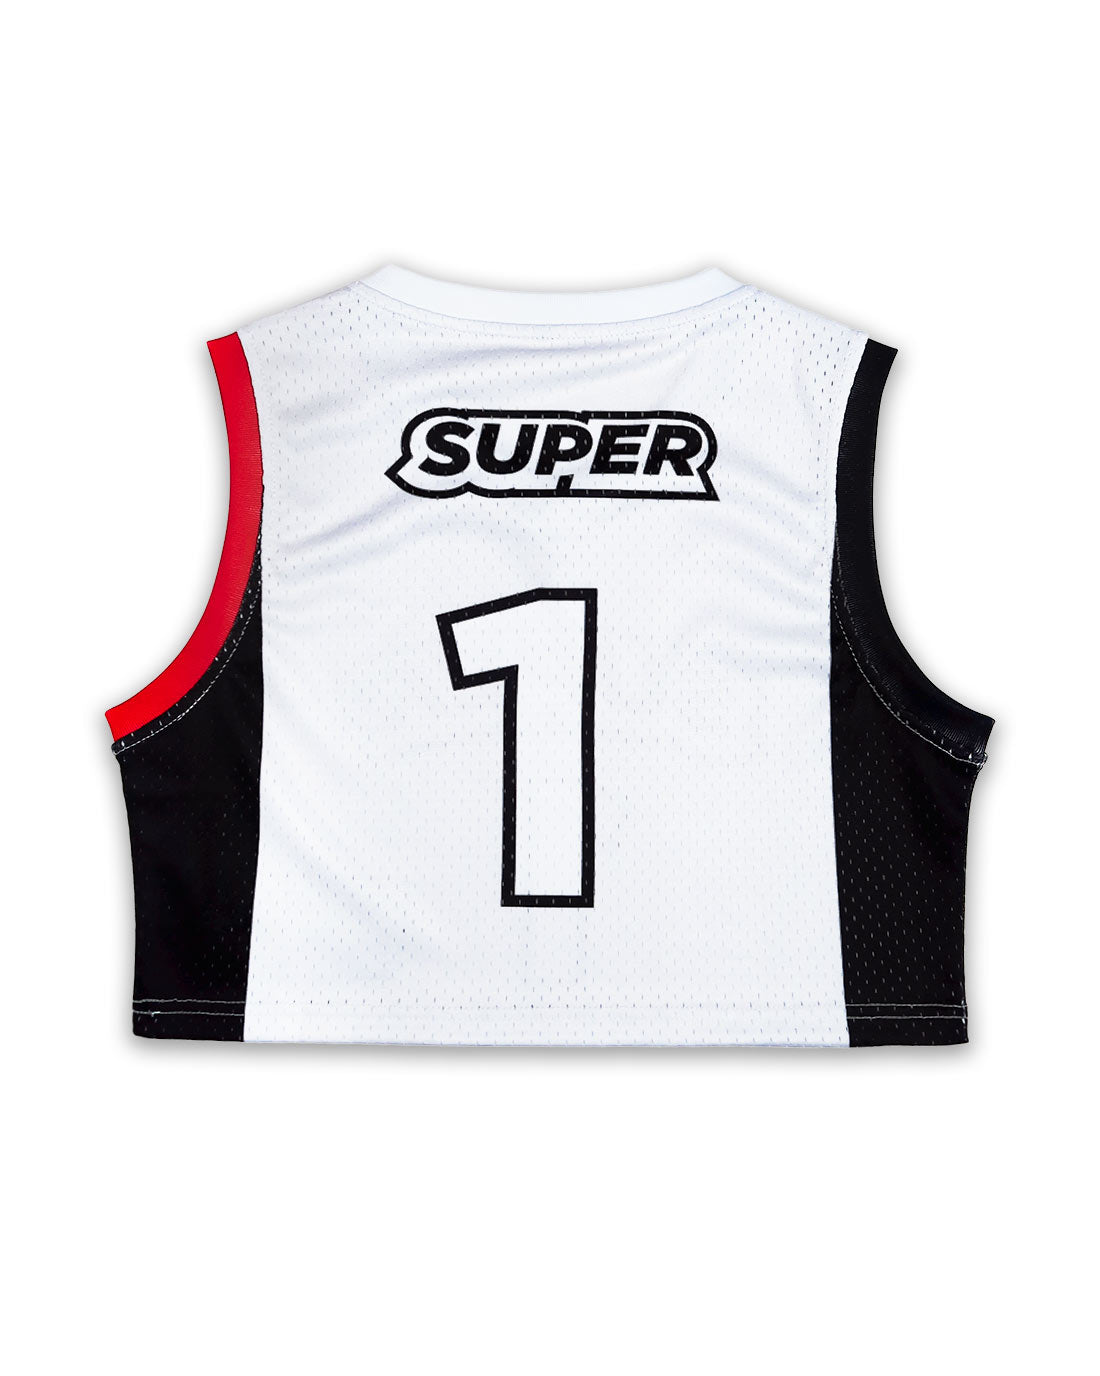 Rear view of a women's basketball jersey crop top in stylish black and white, featuring lightweight mesh fabric, sleeveless design, and number 1 printed on the back.